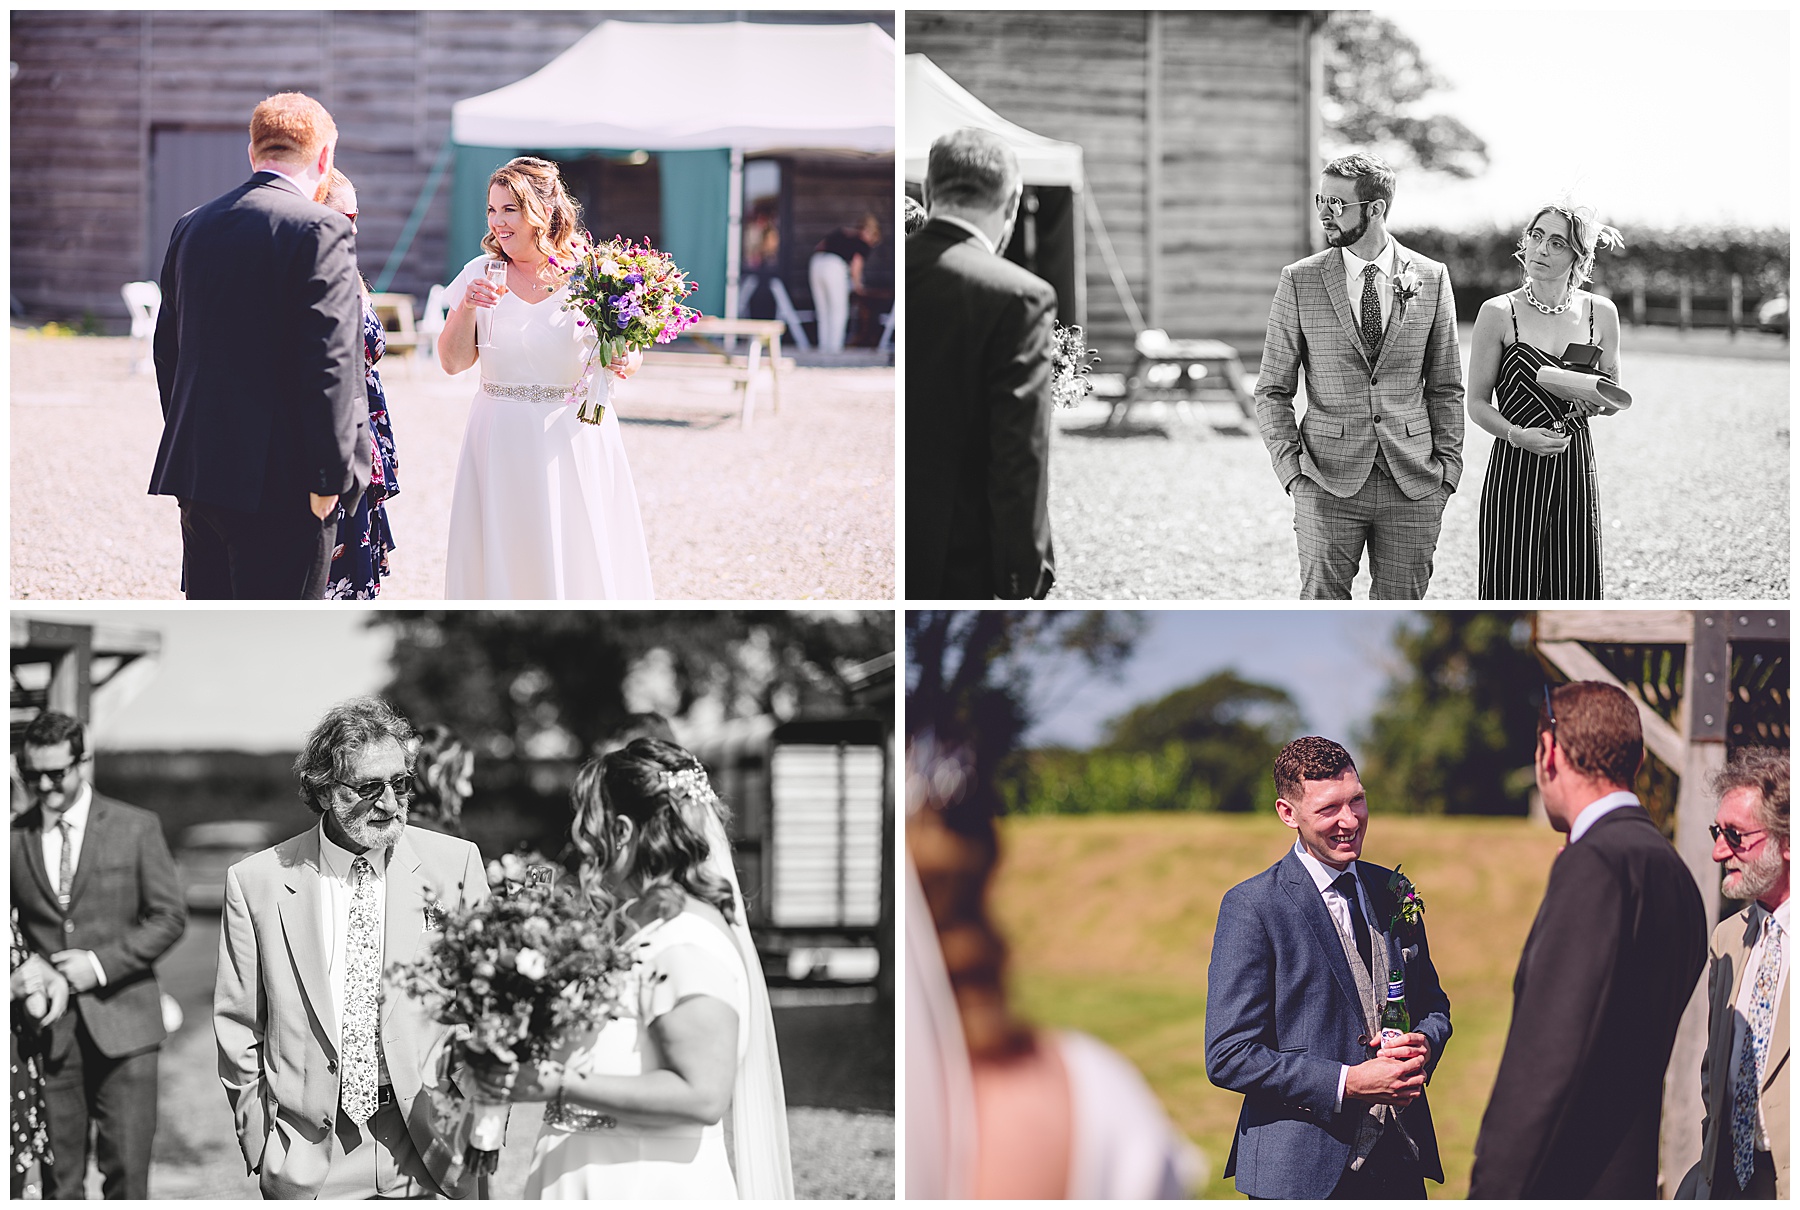 Wedding guests at Woodhouse Barn